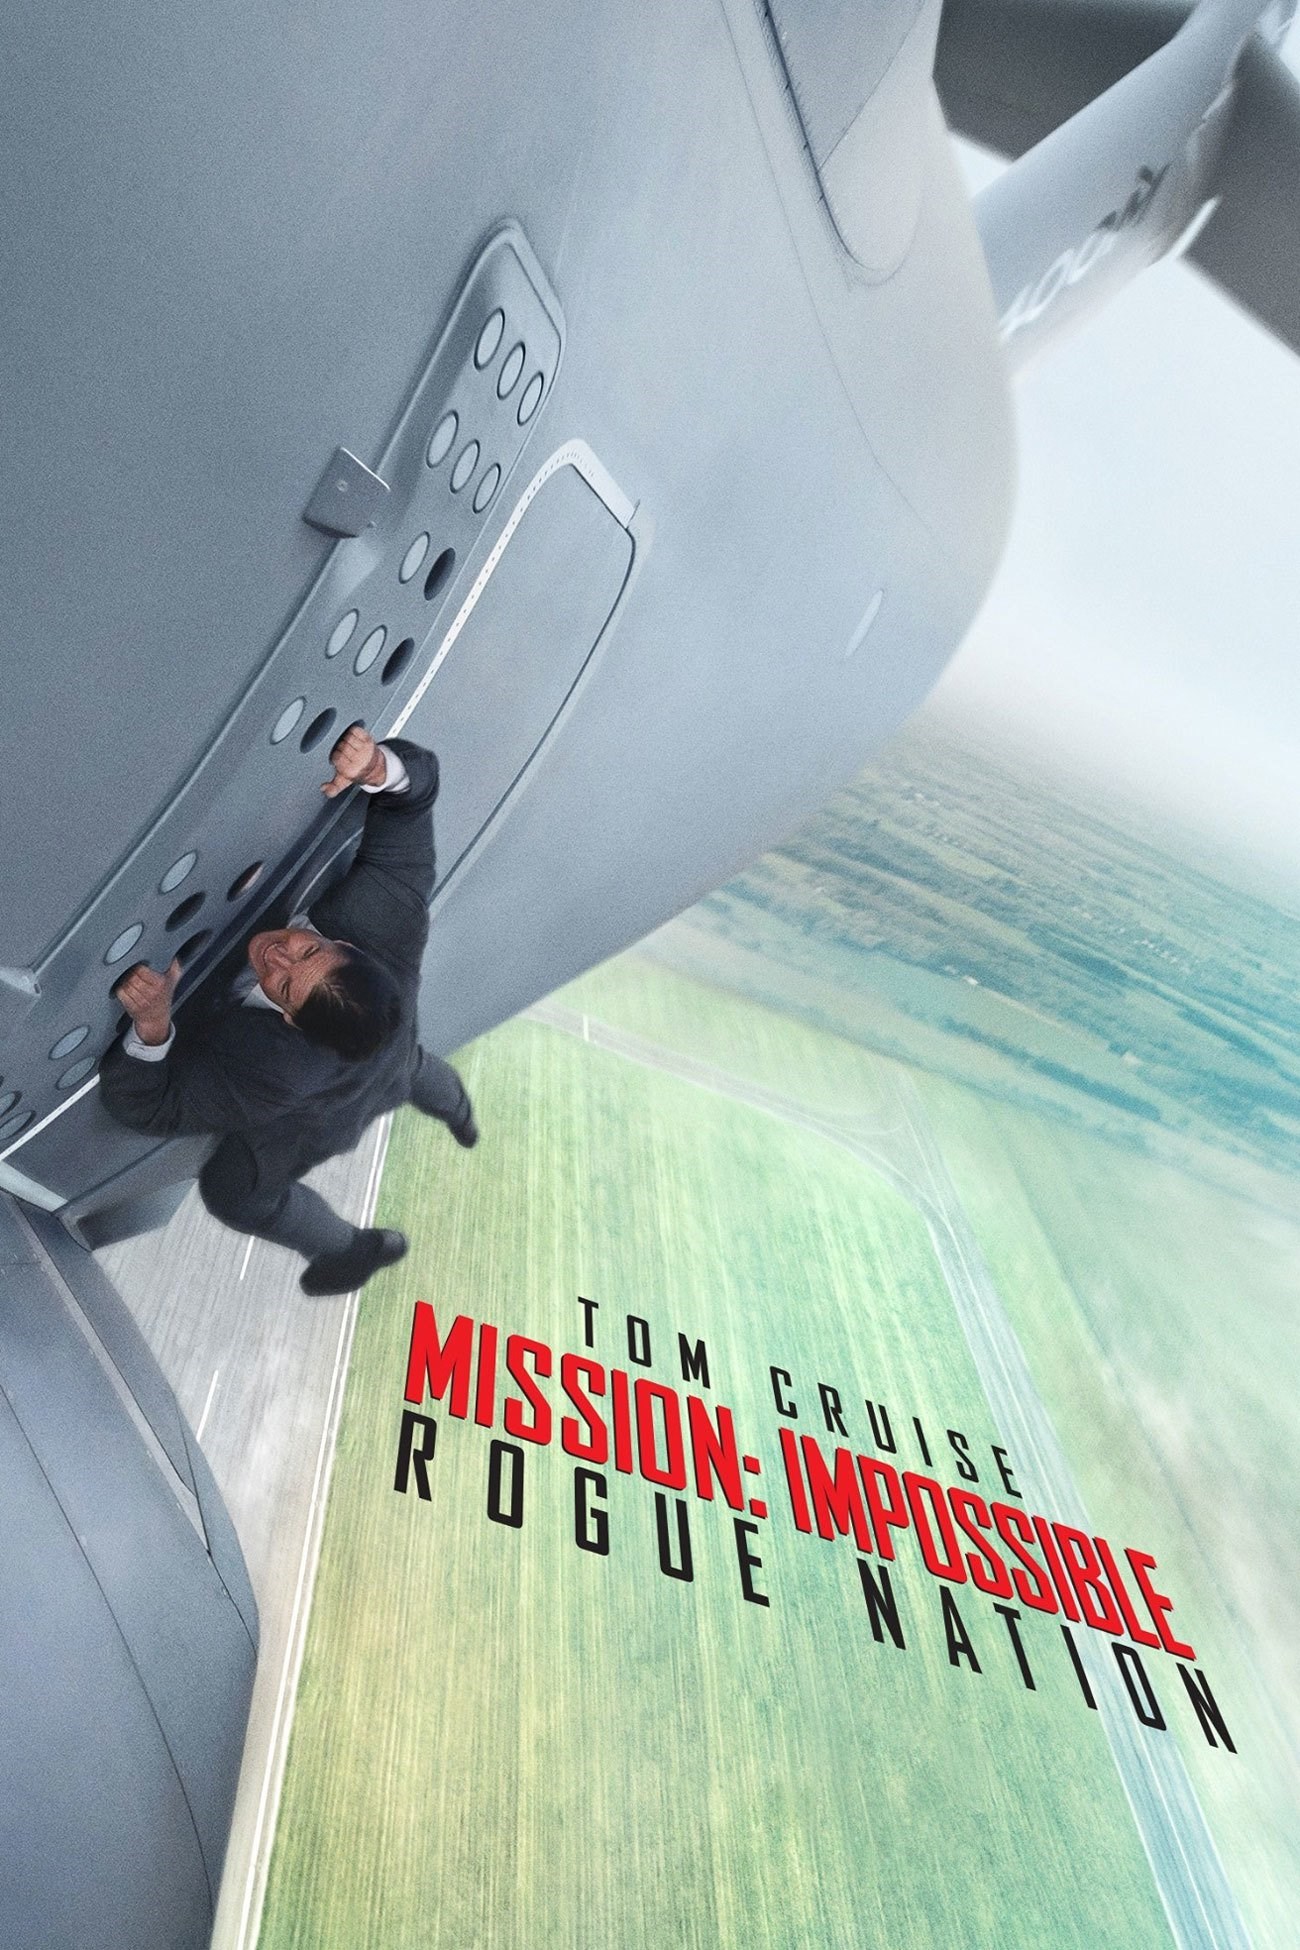 Free download film mission impossible 5 subtitle indonesia